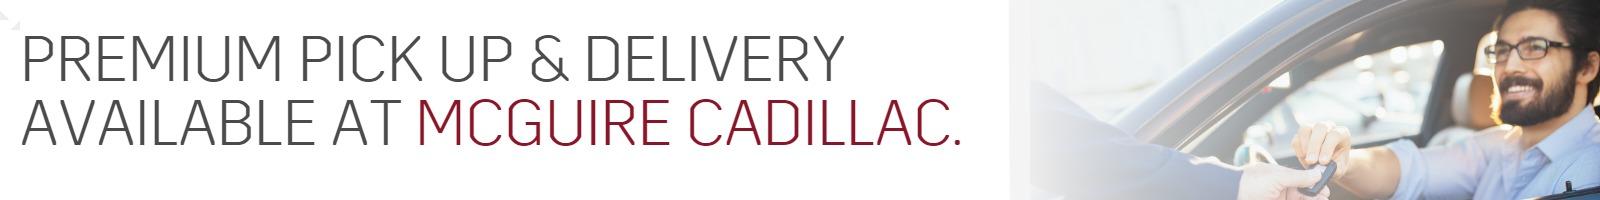 Cadillac Premium Pick-Up and Delivery Service